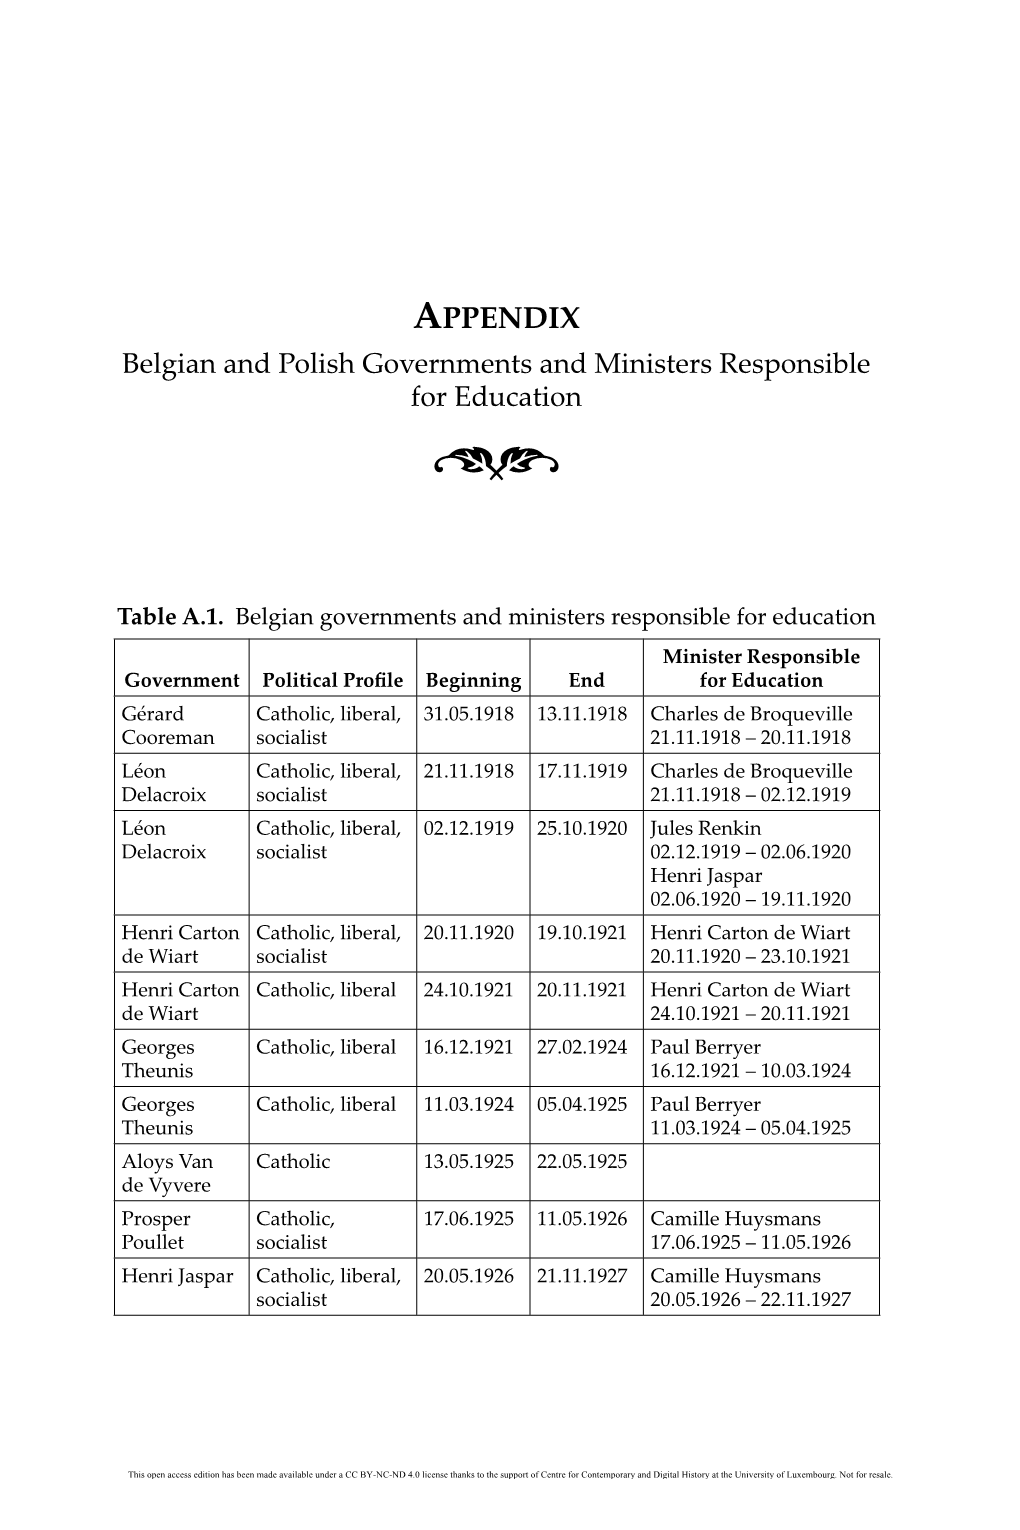 APPENDIX Belgian and Polish Governments and Ministers Responsible for Education (